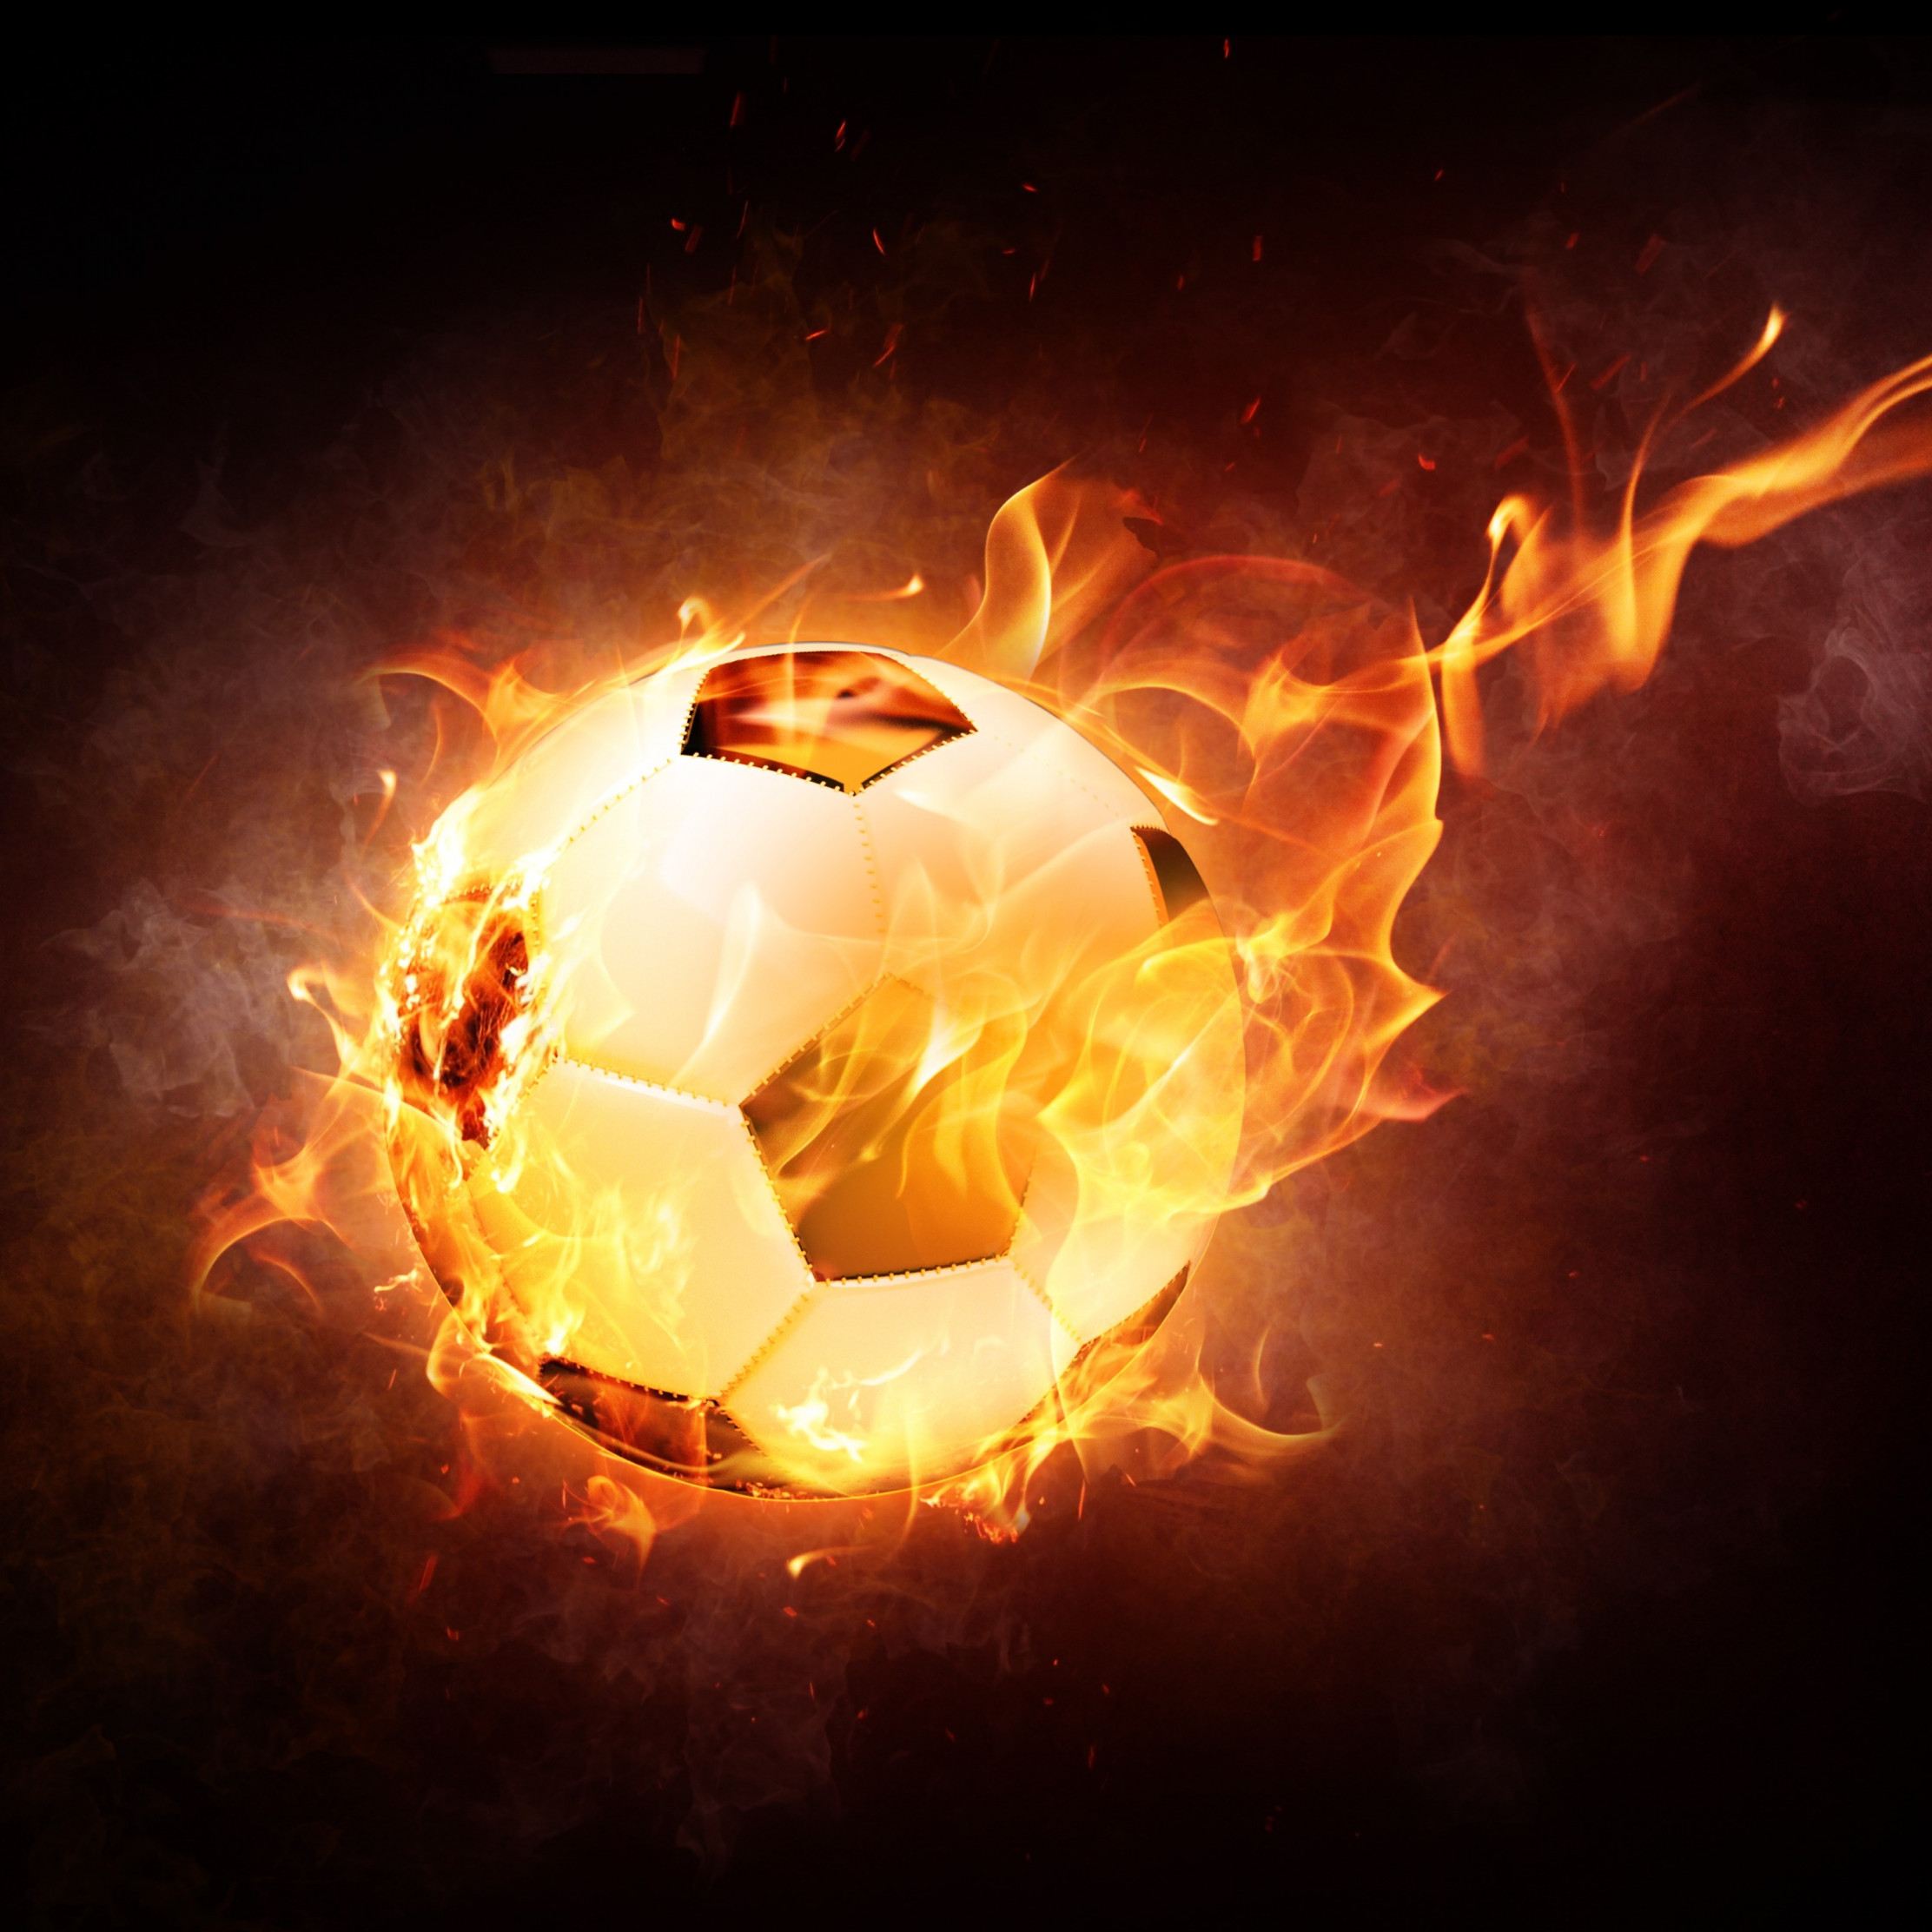 The football ball is on fire wallpaper 2224x2224